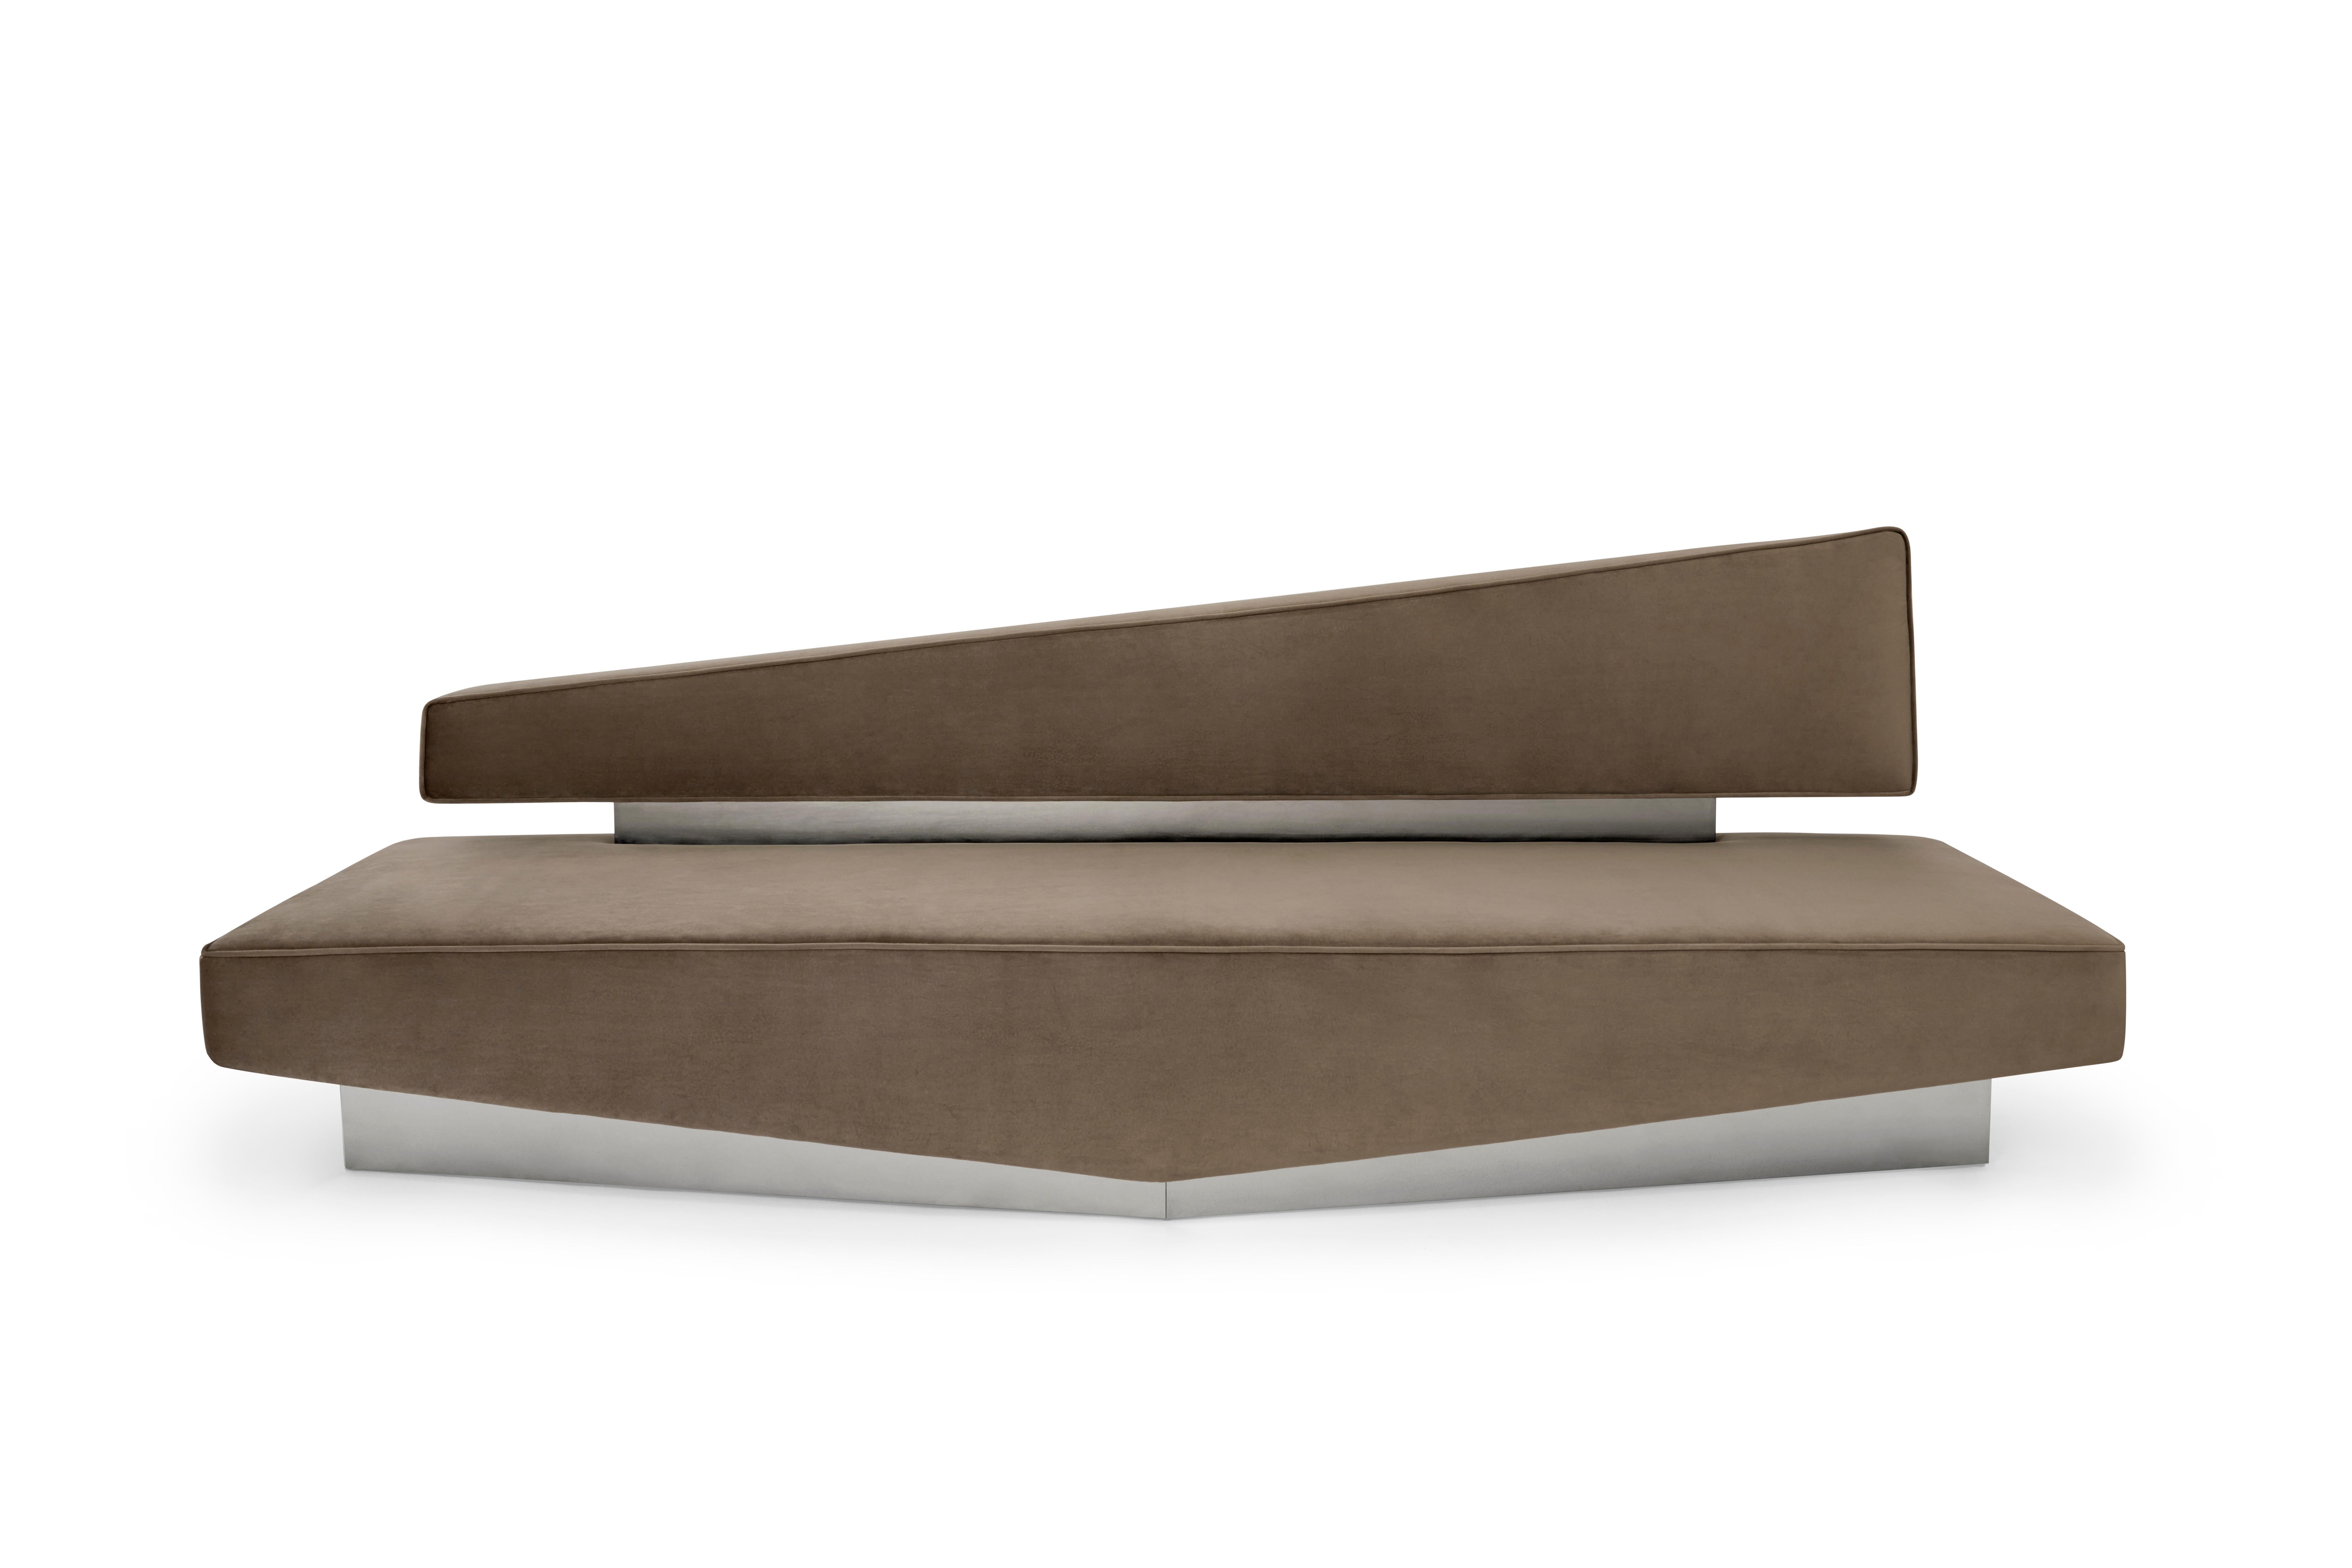 Divergent sofa by Marta Delgado Studio

Model on the picture:
Fabric: Velvet 
Color: Olive 
Metal: stainless steel polished

Dimensions:
Width: 94.5” 240 cm 
Depth: 32.7” 83 cm 
Height: 31.5” 80 cm 
Seat Height: 15.7” 40 cm 

Marta